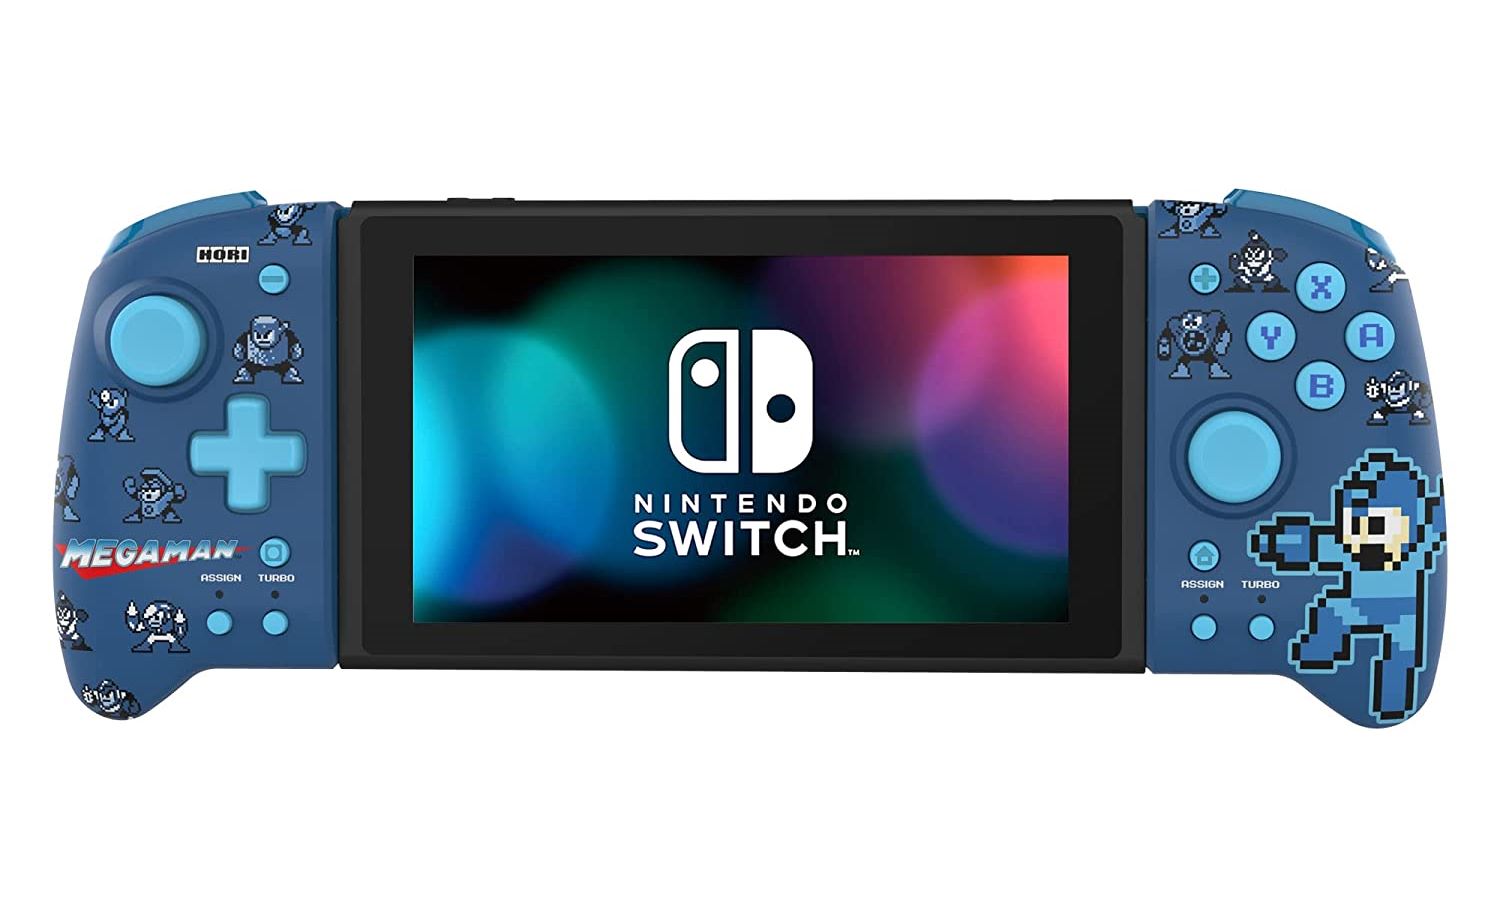 HORI reveals Split Pad Fit for Switch, new version of the Split